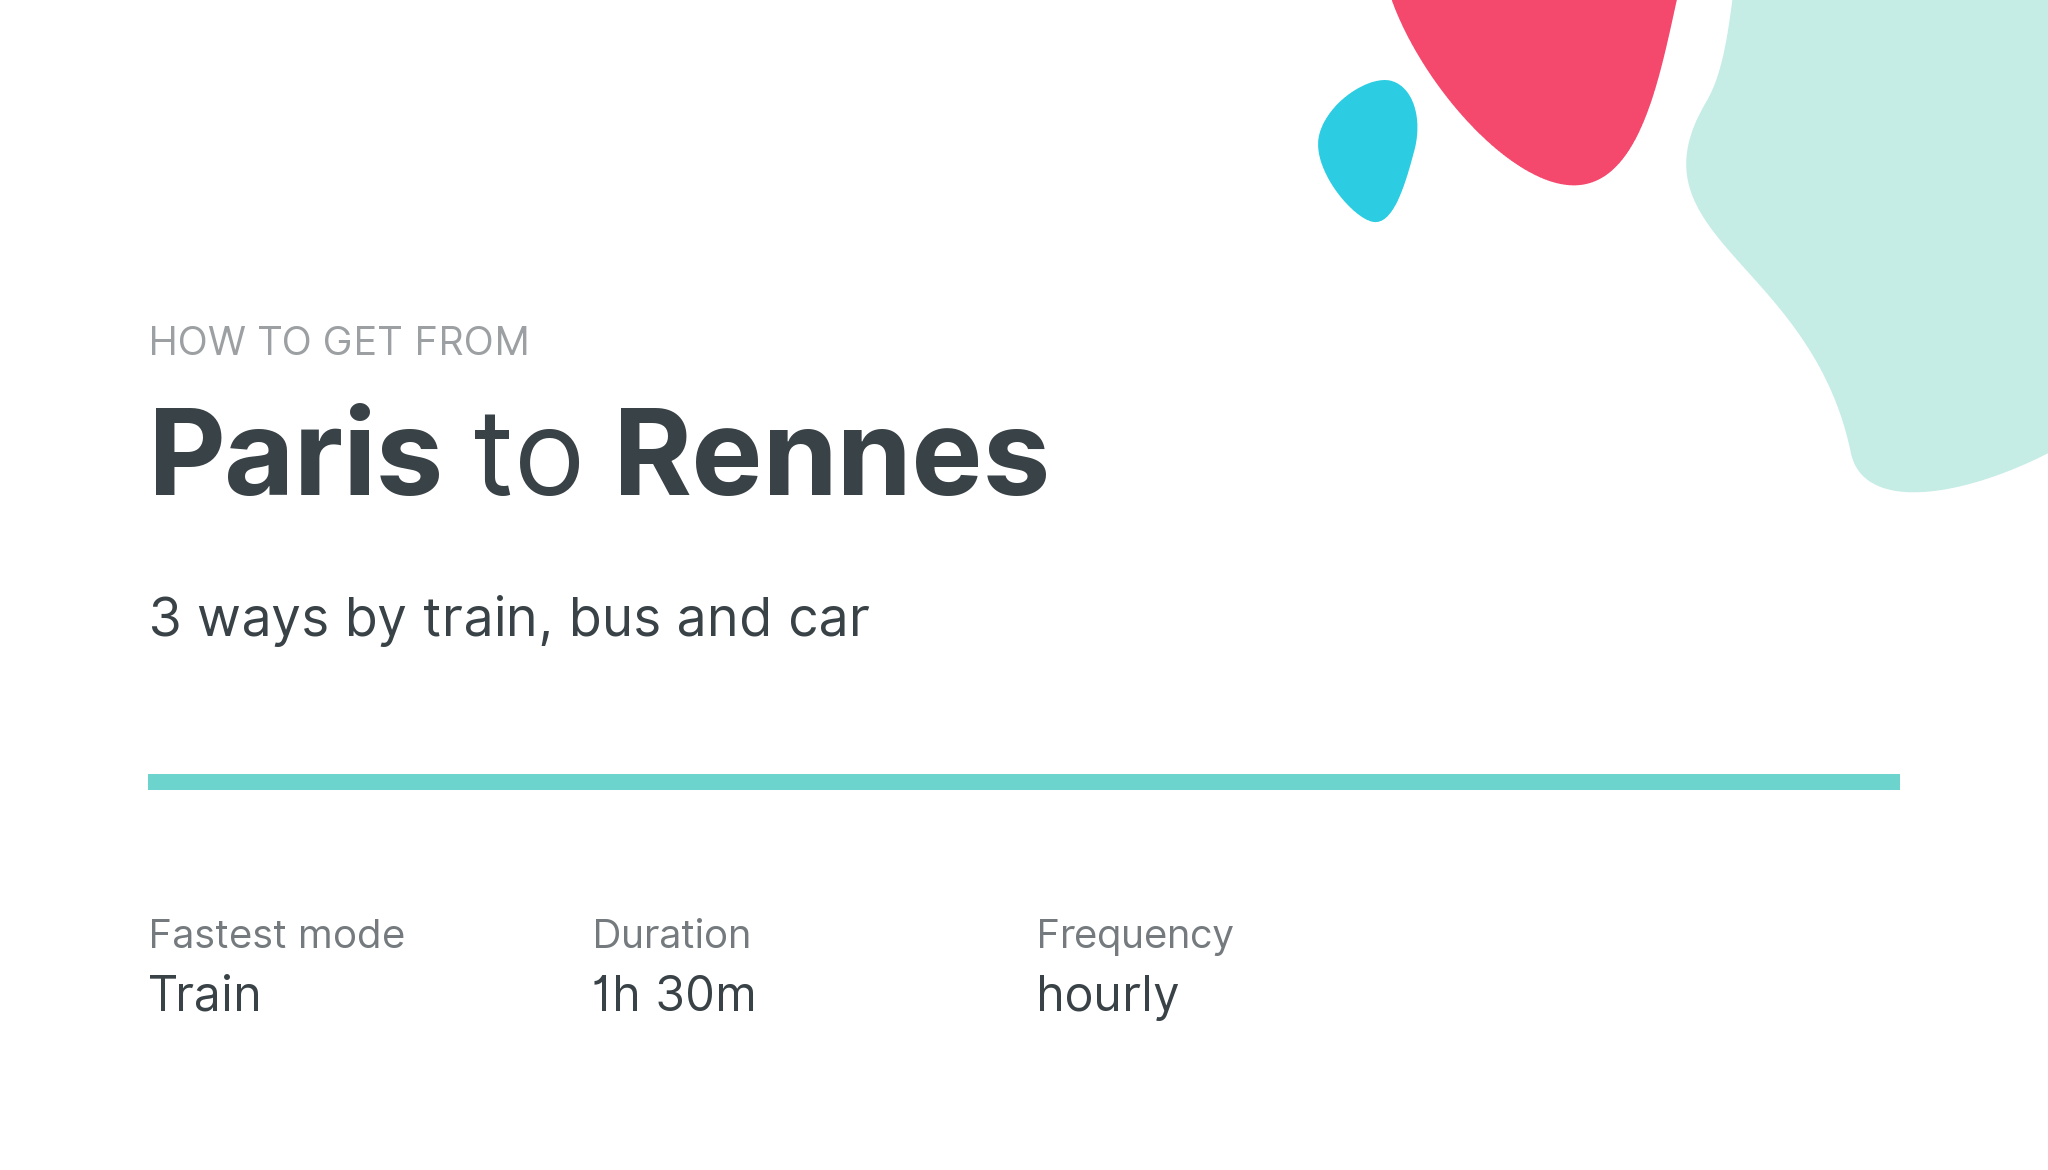 How do I get from Paris to Rennes